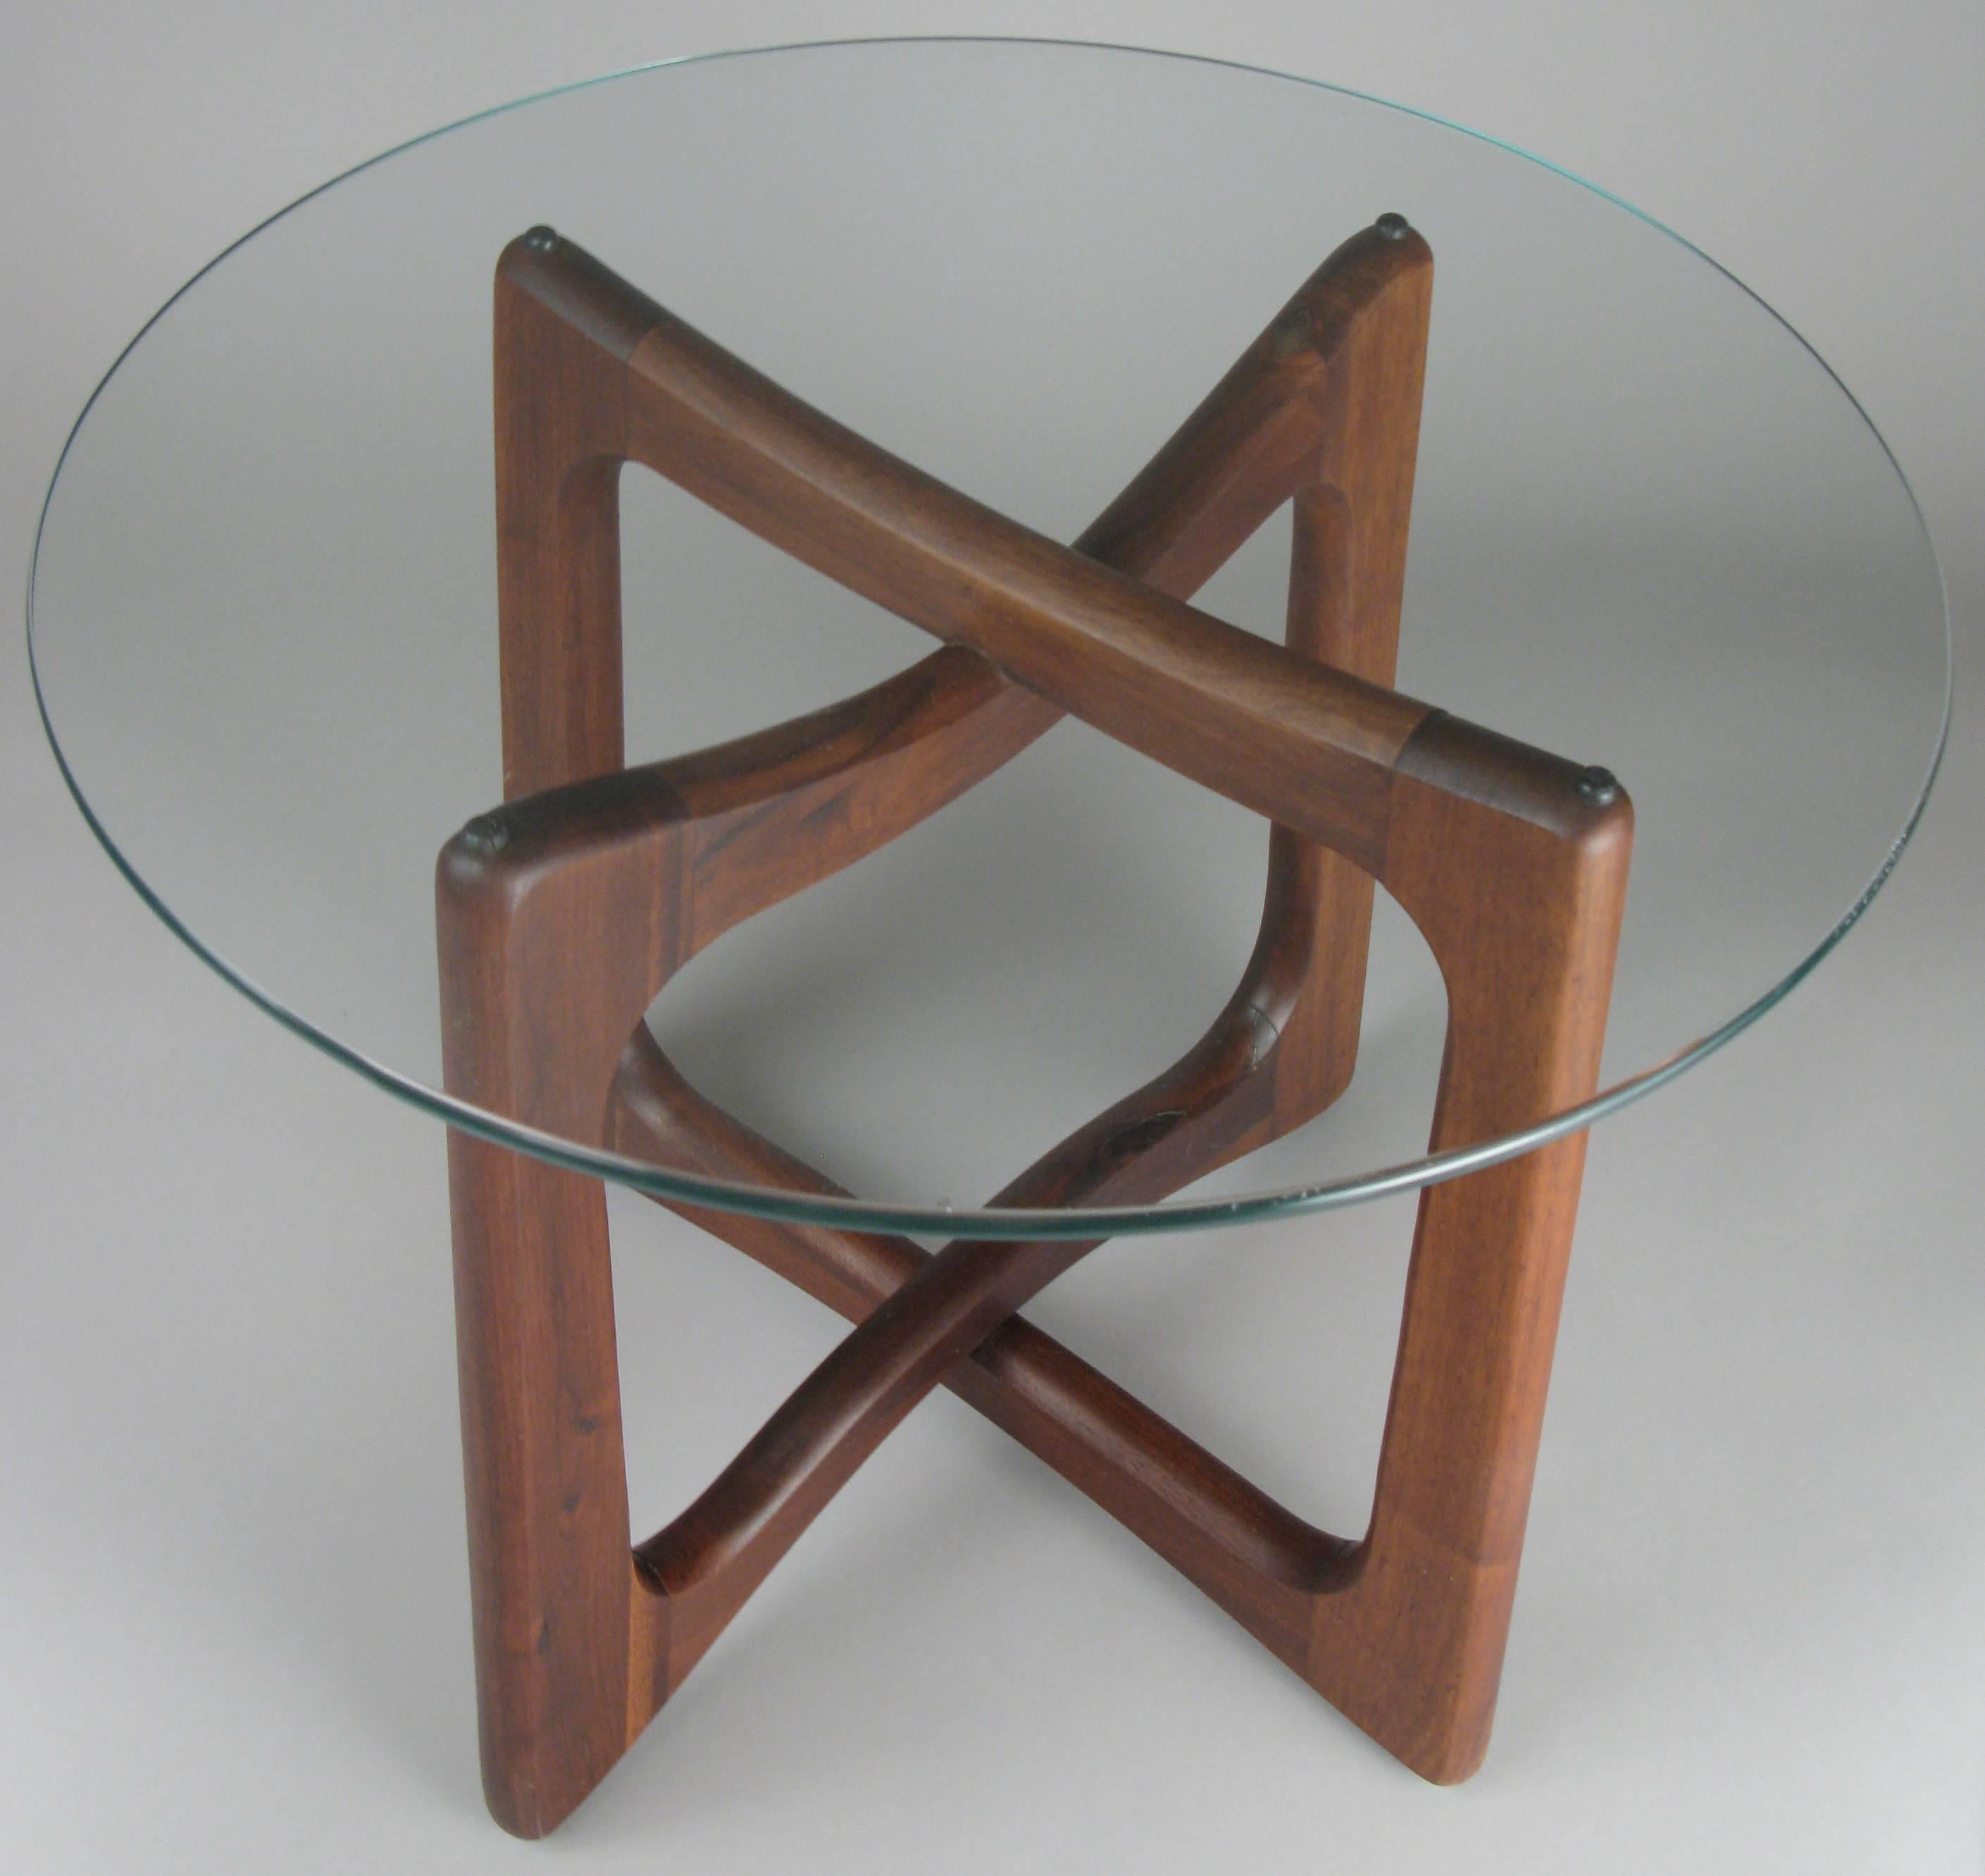 American Pair of Sculptural Walnut and Glass Tables by Adrian Pearsall